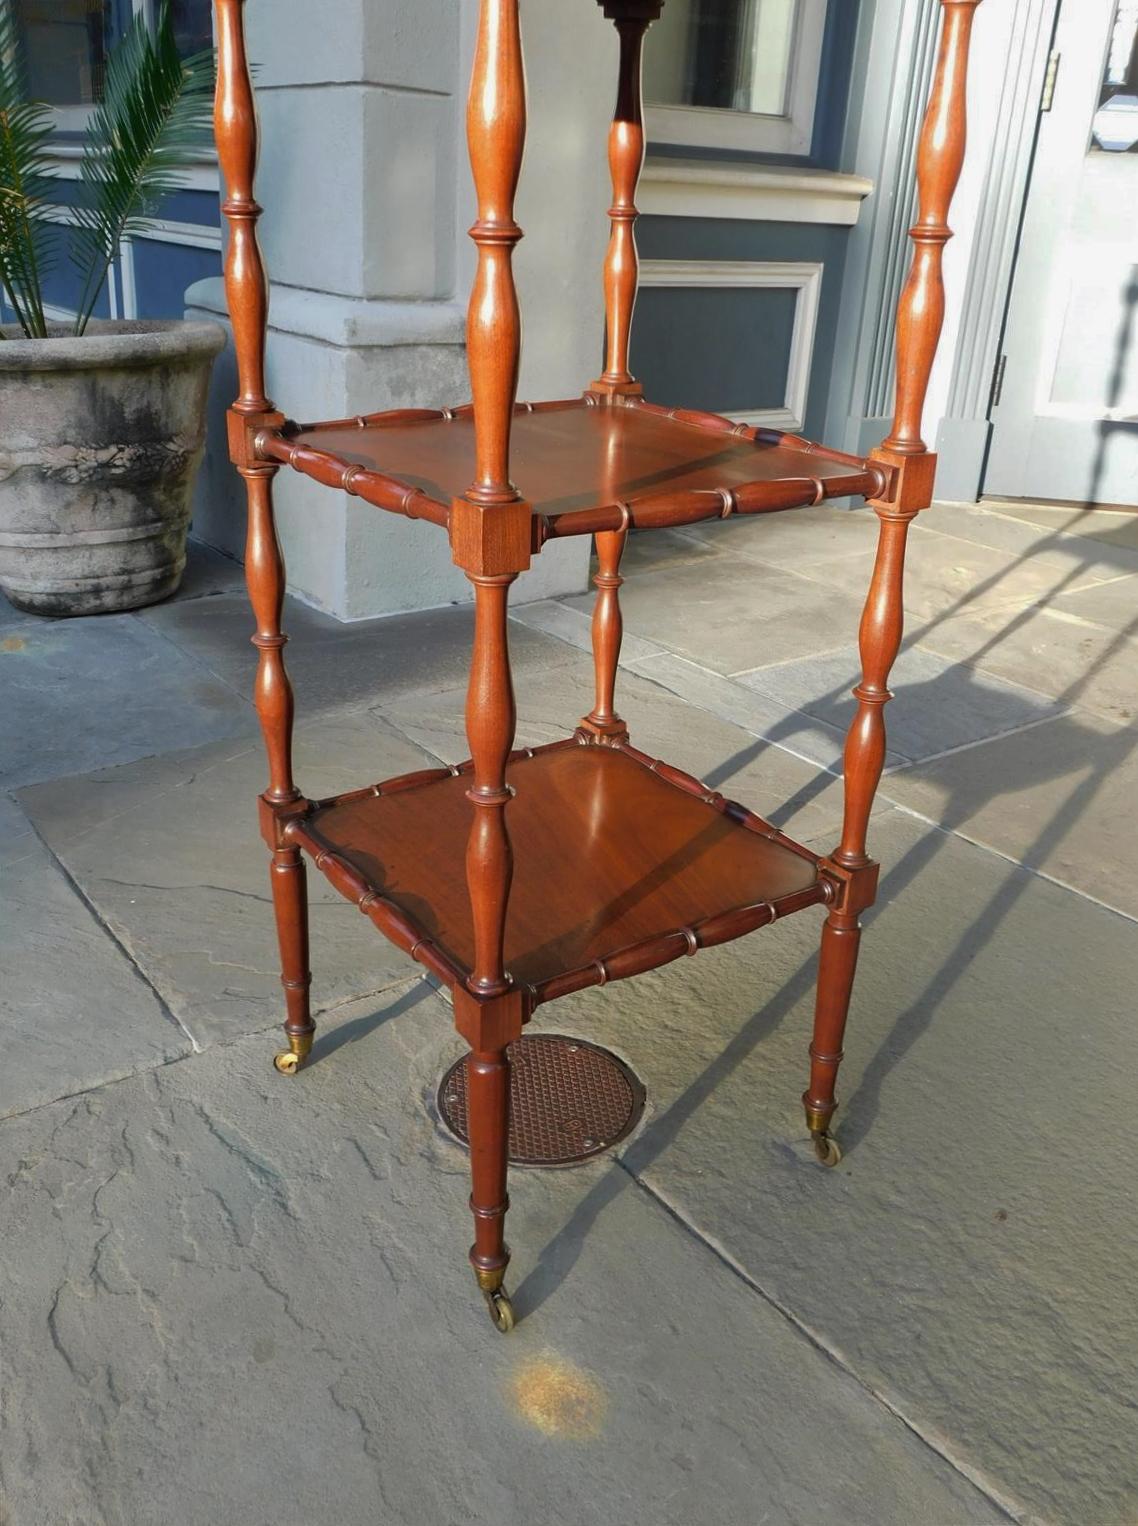 English Regency Mahogany Four Tiered Finial Etagere with Brass Casters, C. 1800 For Sale 1